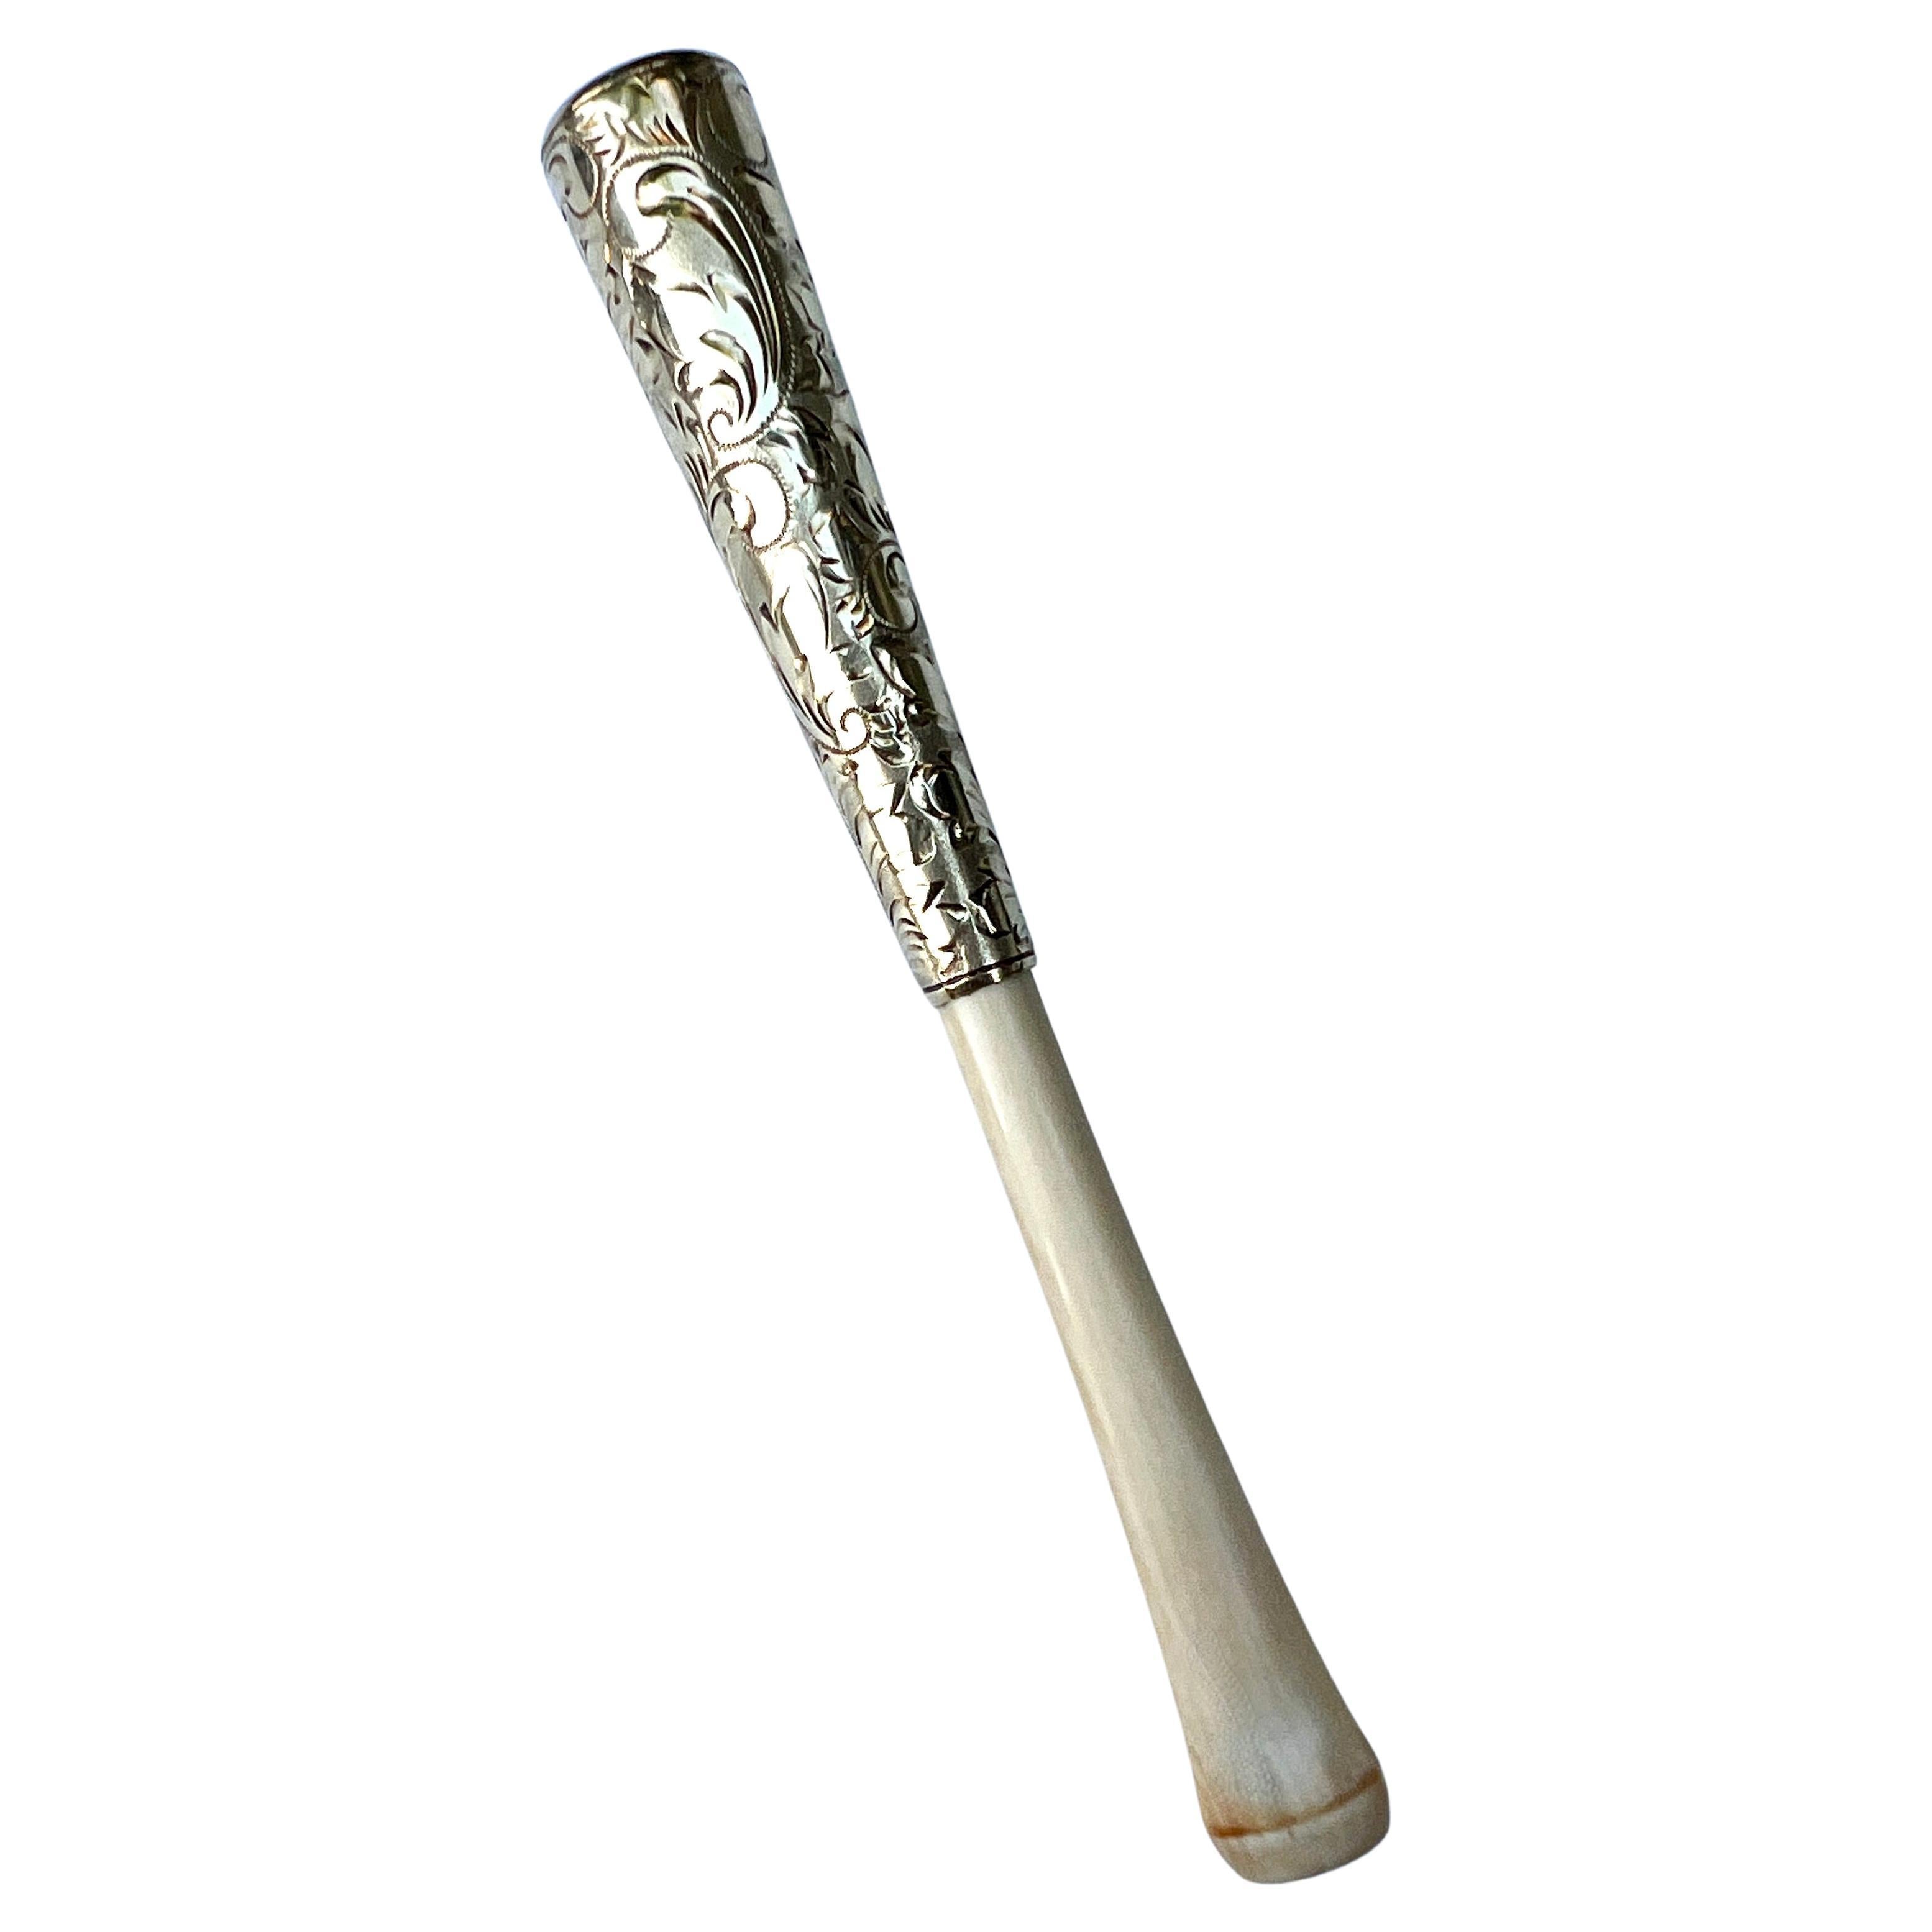 Incredible Hand Tooled 14k Gold Cigarette holder with bone.  The piece is exquisitely made, and while it could be used for cigarettes, we might recommend use with 420, or as a decorative Jewelry piece.  The holder has been fully cleaned and works